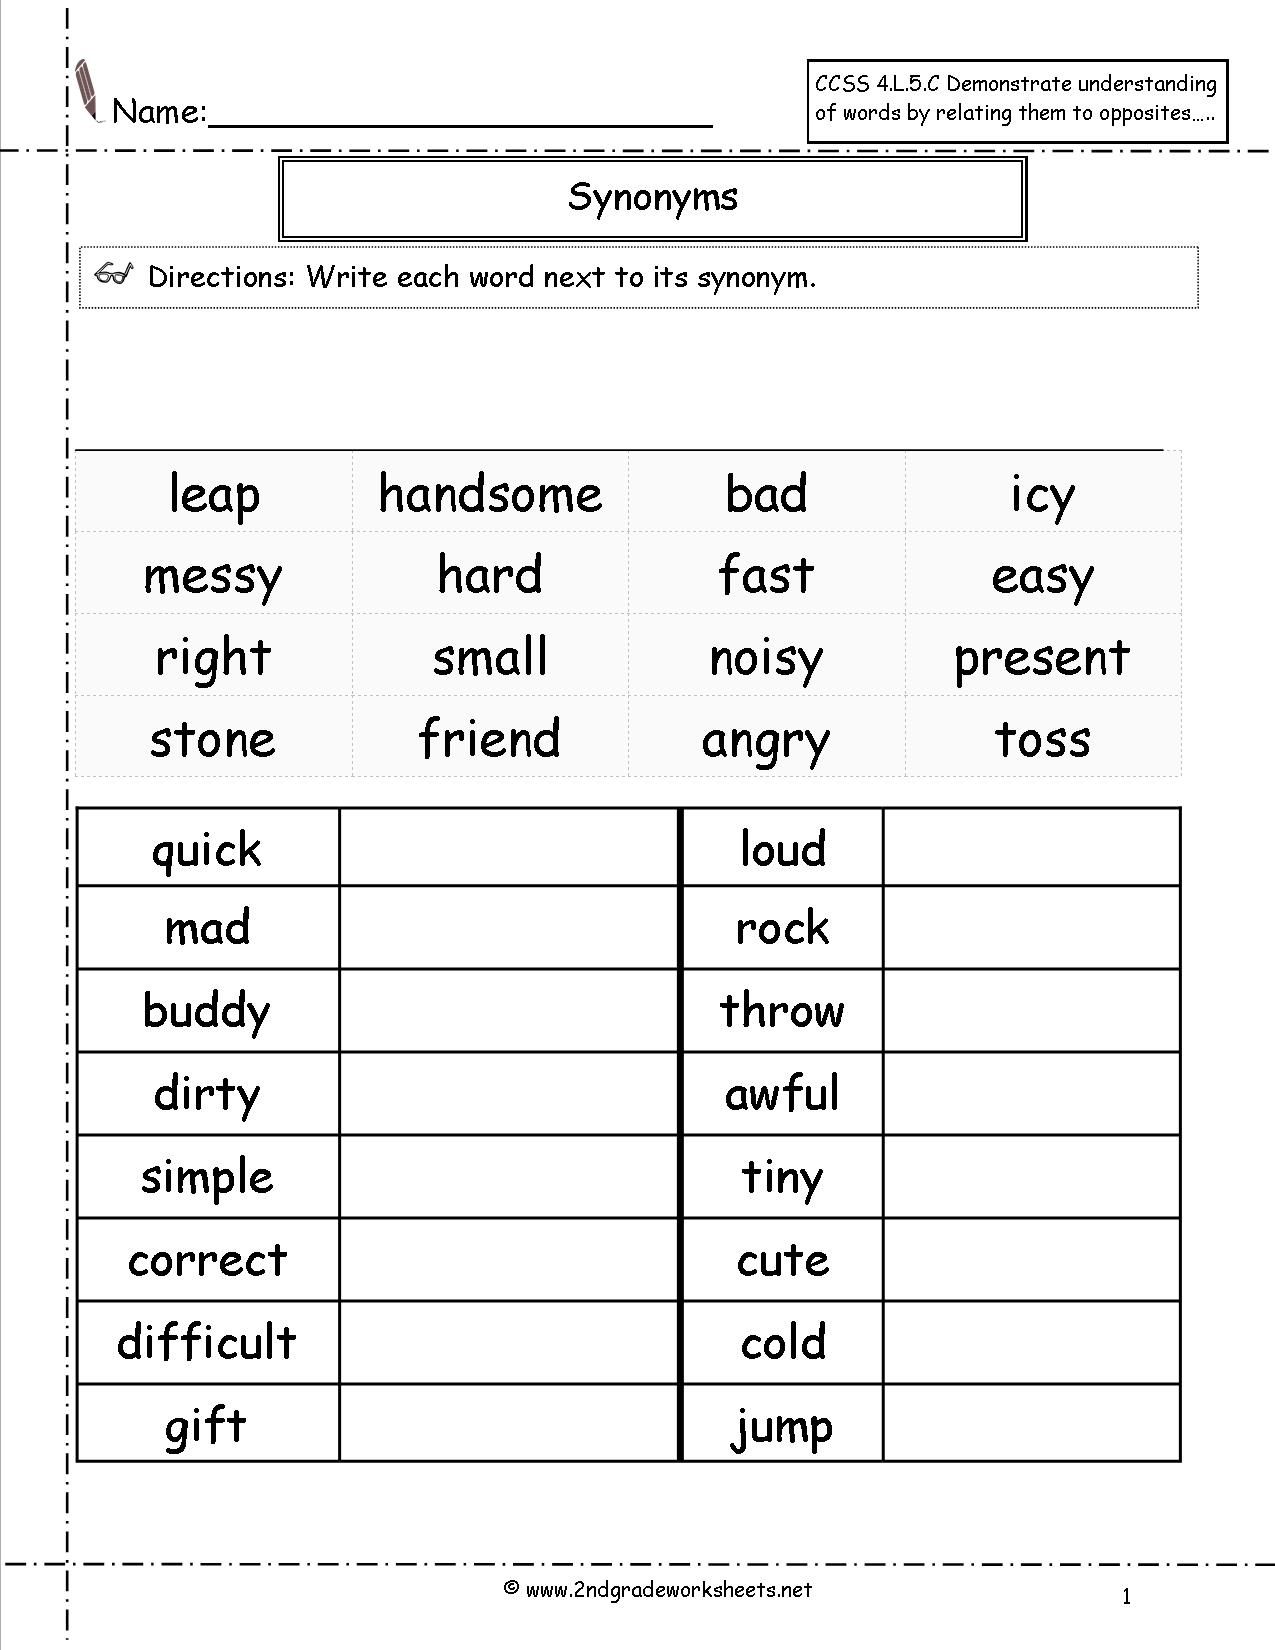 Synonyms and Antonyms Worksheets Image